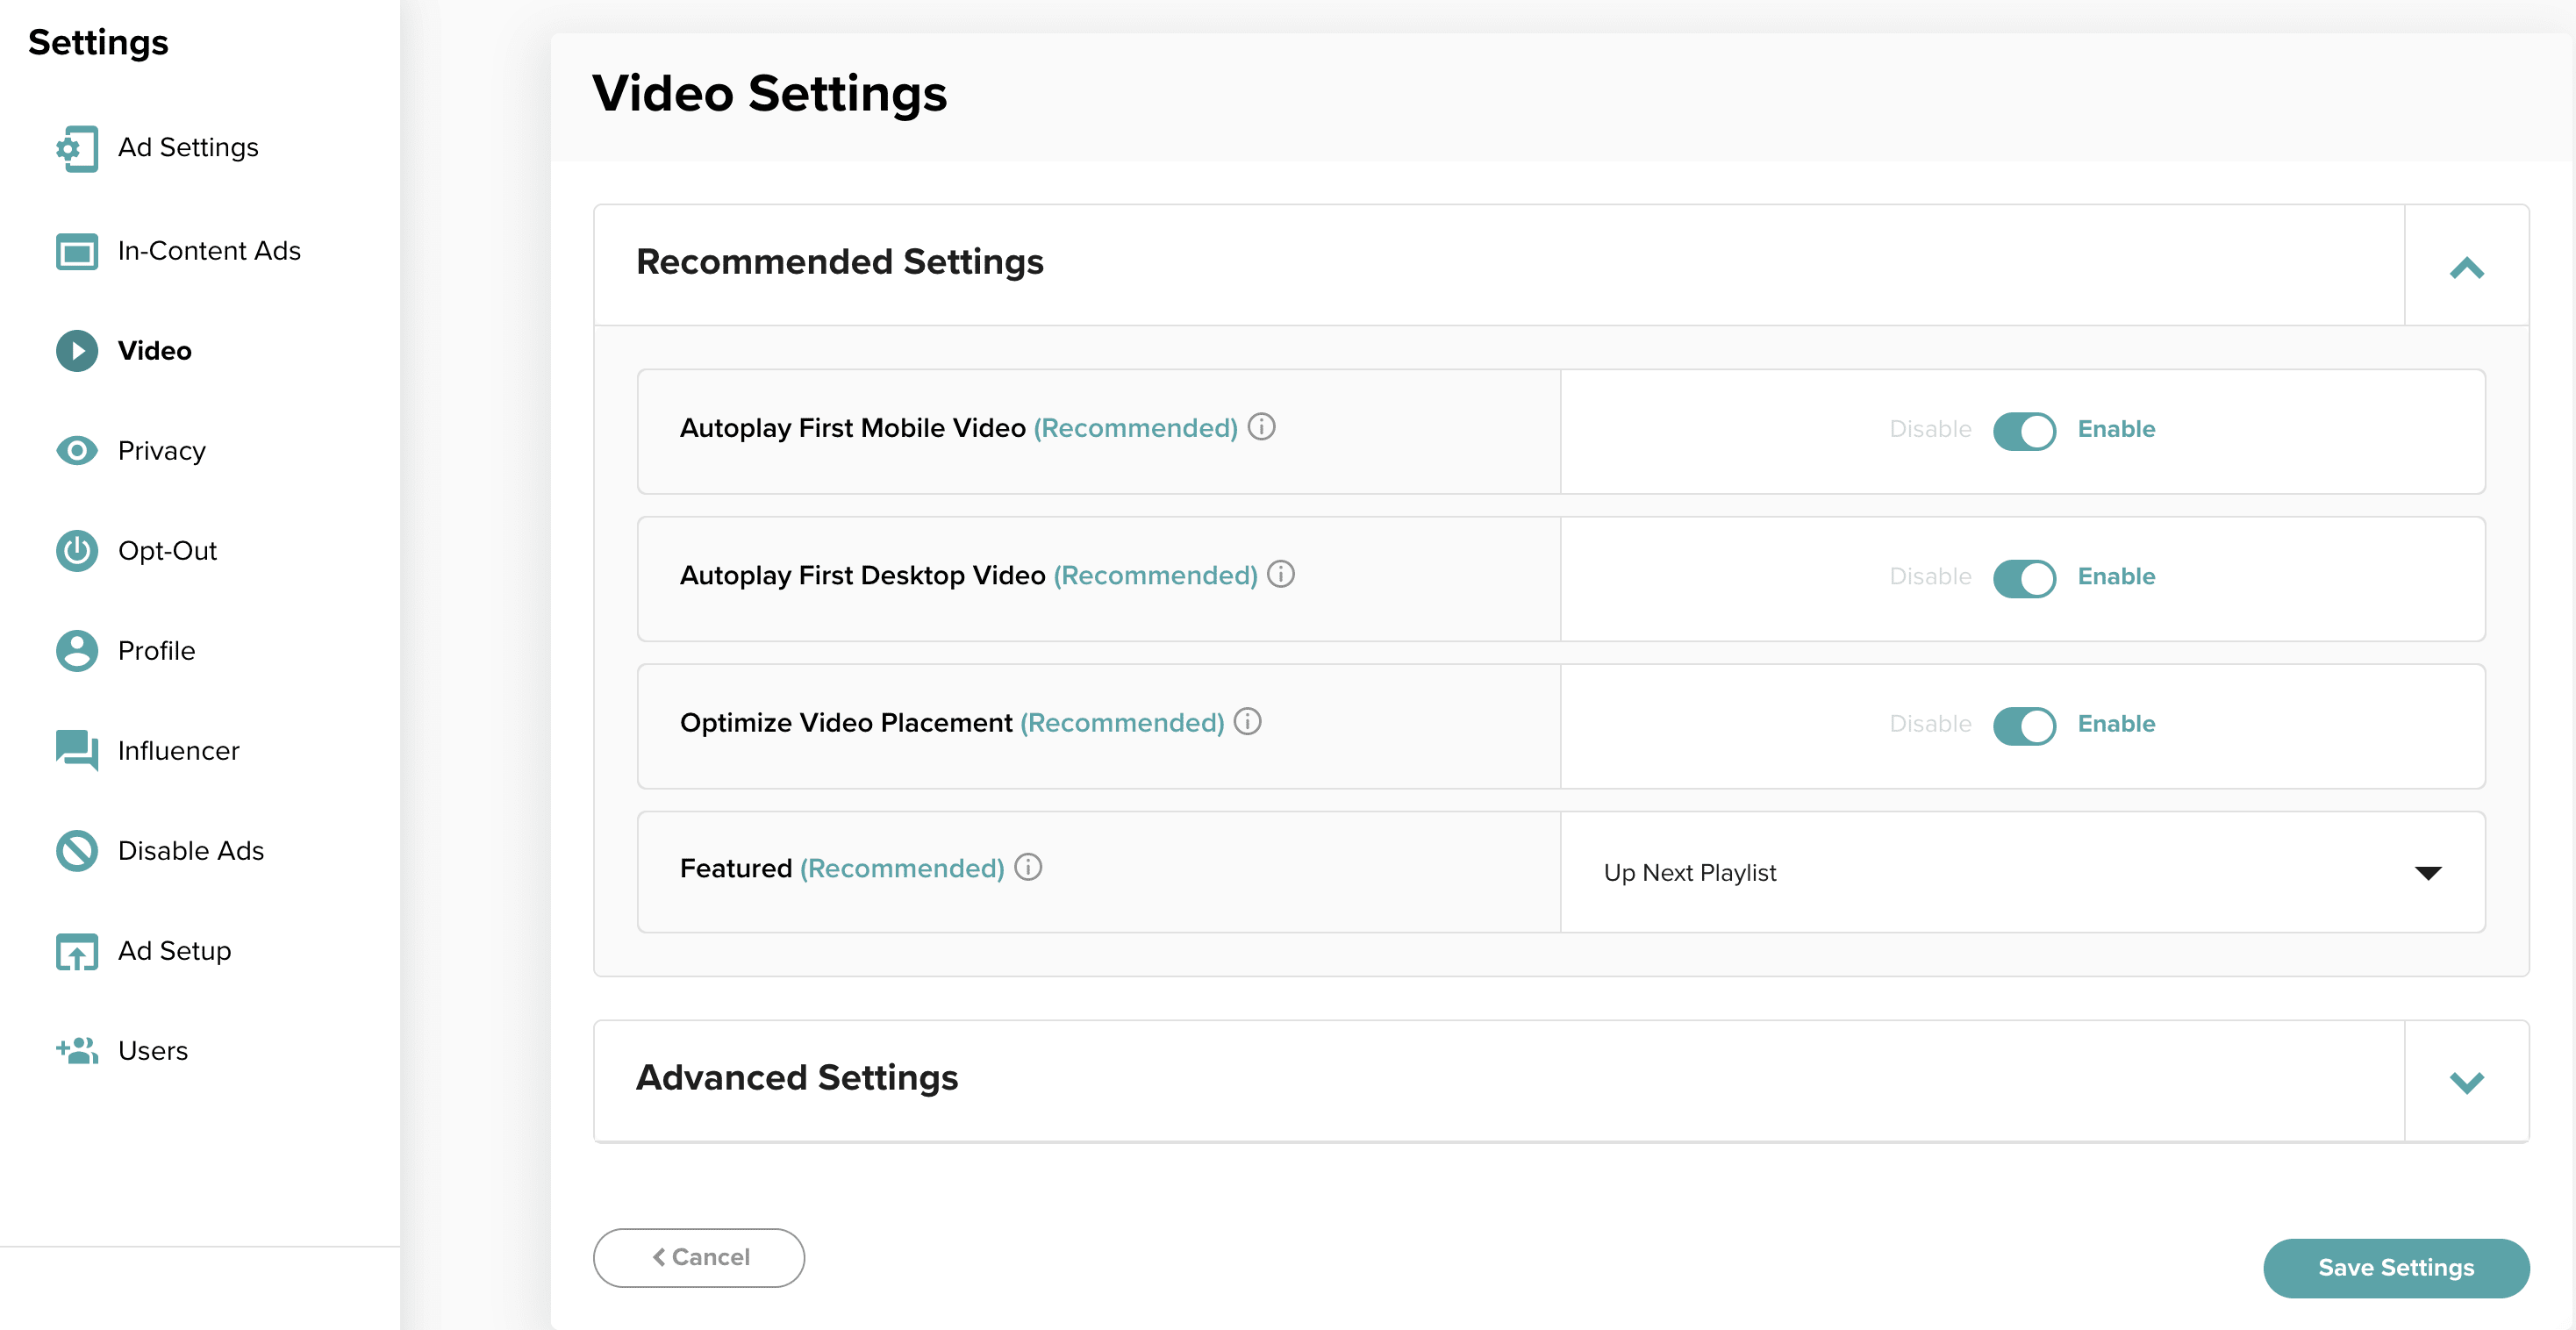 Screenshot of video settings in the Mediavine Dashboard with "Up Next" selected for the "Featured" setting